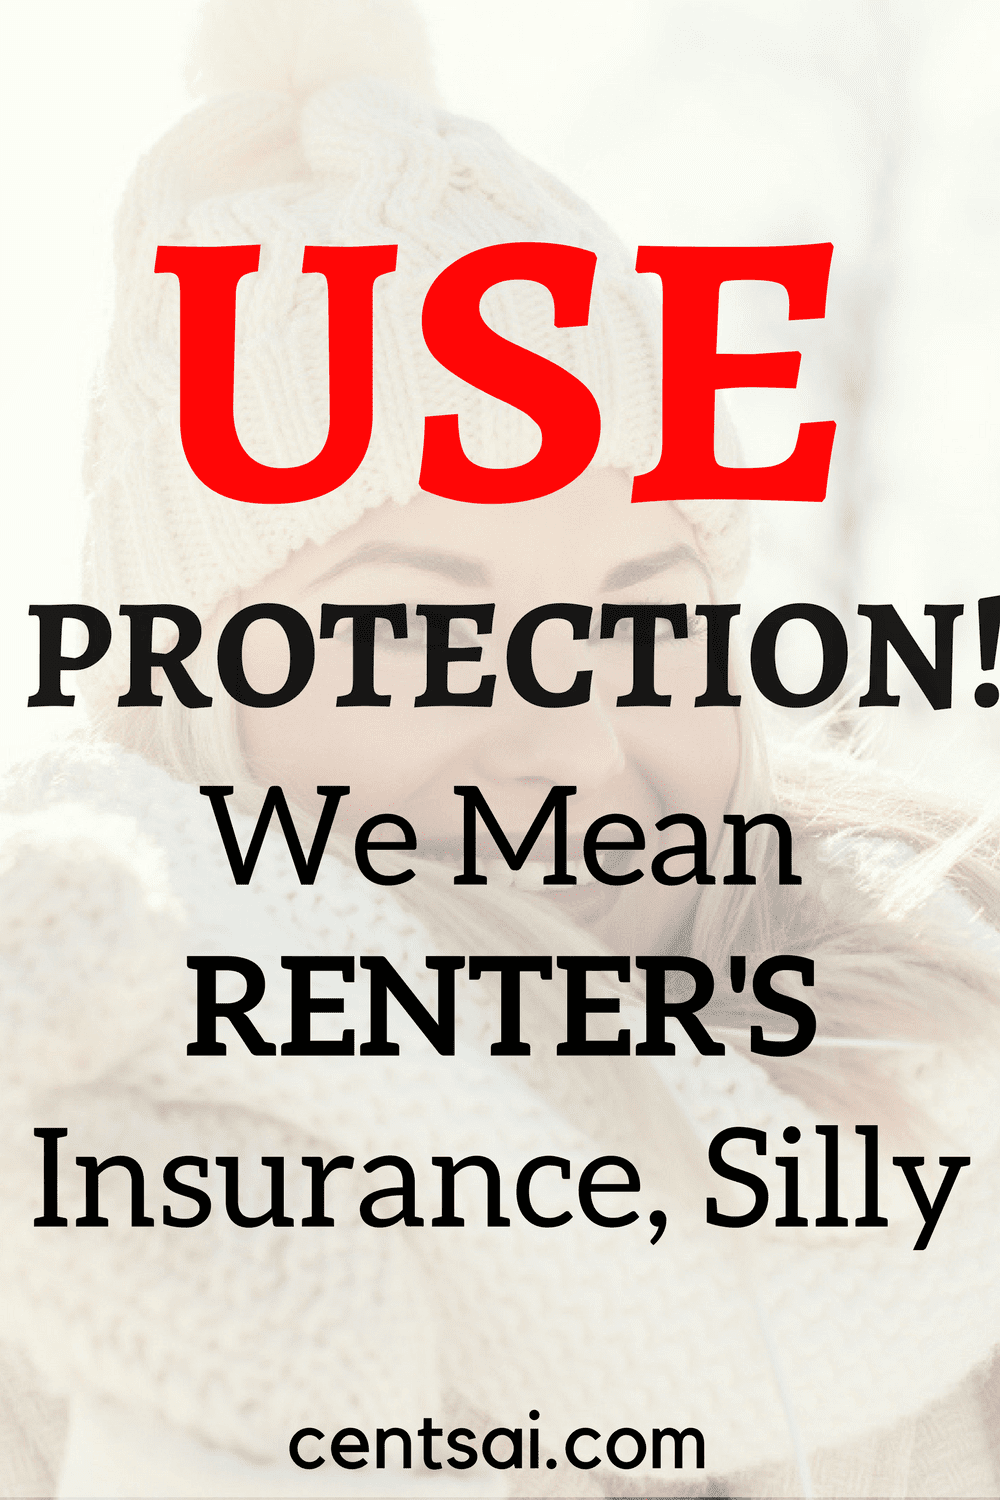 Use Protection! We Mean Renter’s Insurance, Silly. Don't get complacent – if an emergency occurs, landlord's insurance won't protect you if the worst happens.